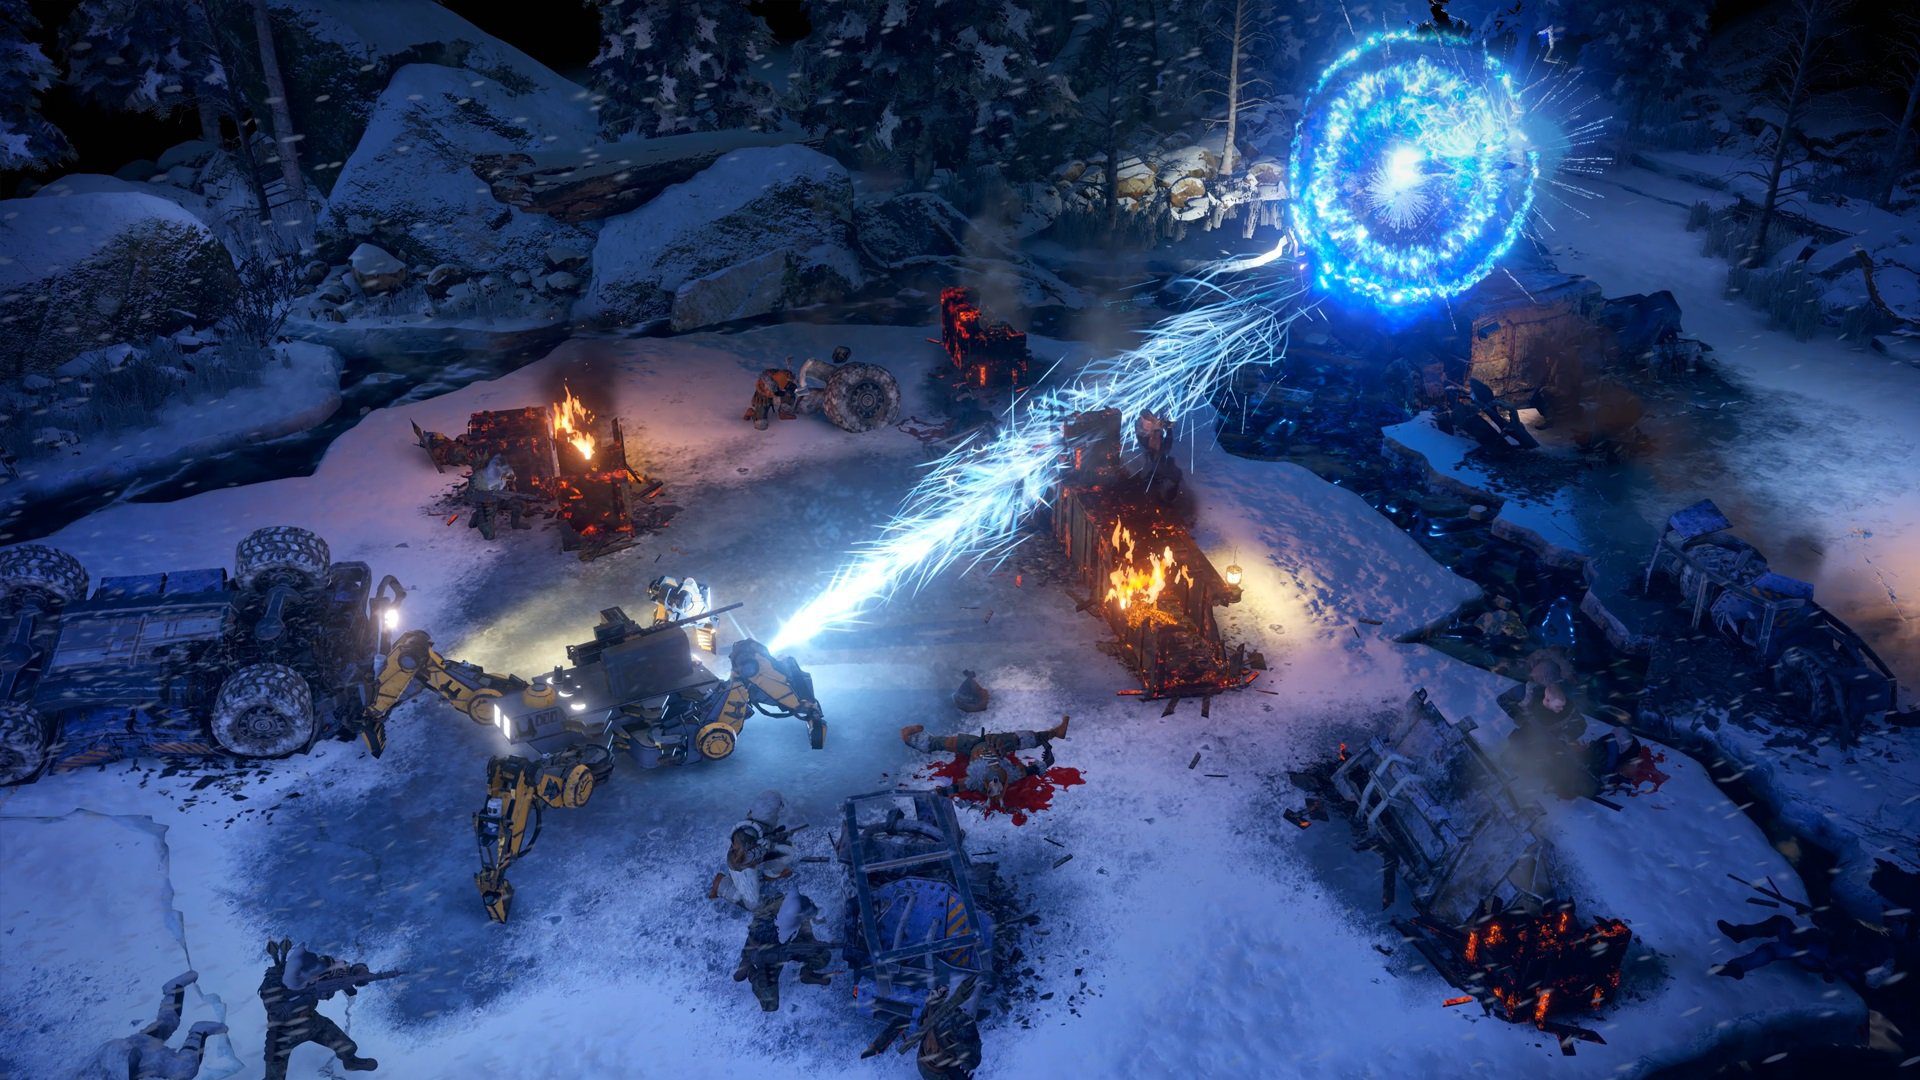 inXile is using Unreal Engine 5 for its next game